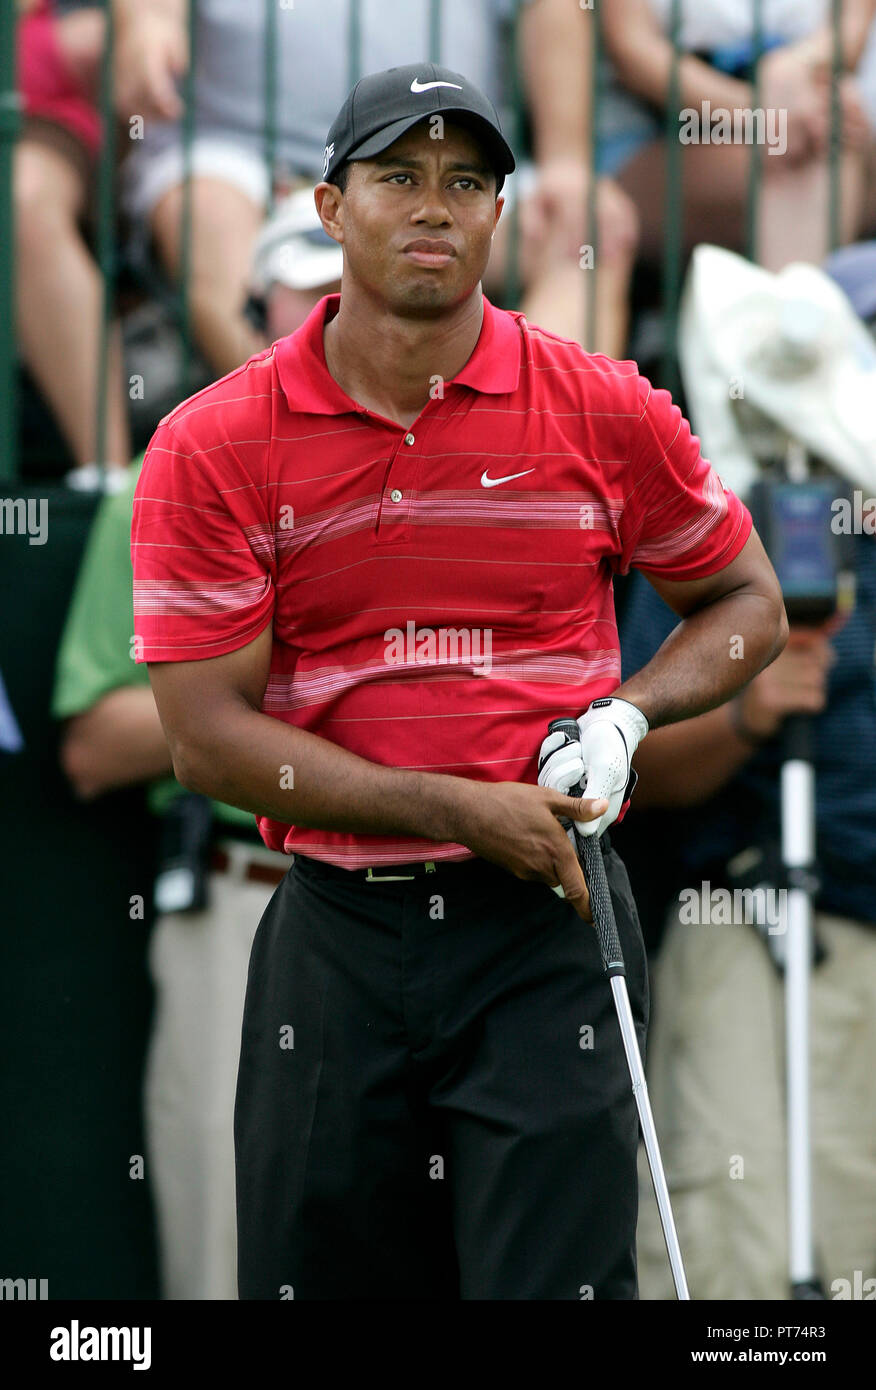 Tiger Woods tees off on the 1st hole during the final round of the World Golf Championships - CA Championship at Doral Resort and Spa in Doral, Florida on March 23, 2008. Woods is twelve under par after 11 holes of the suspended final round. Woods has won the past 5 PGA Tour events. Stock Photo